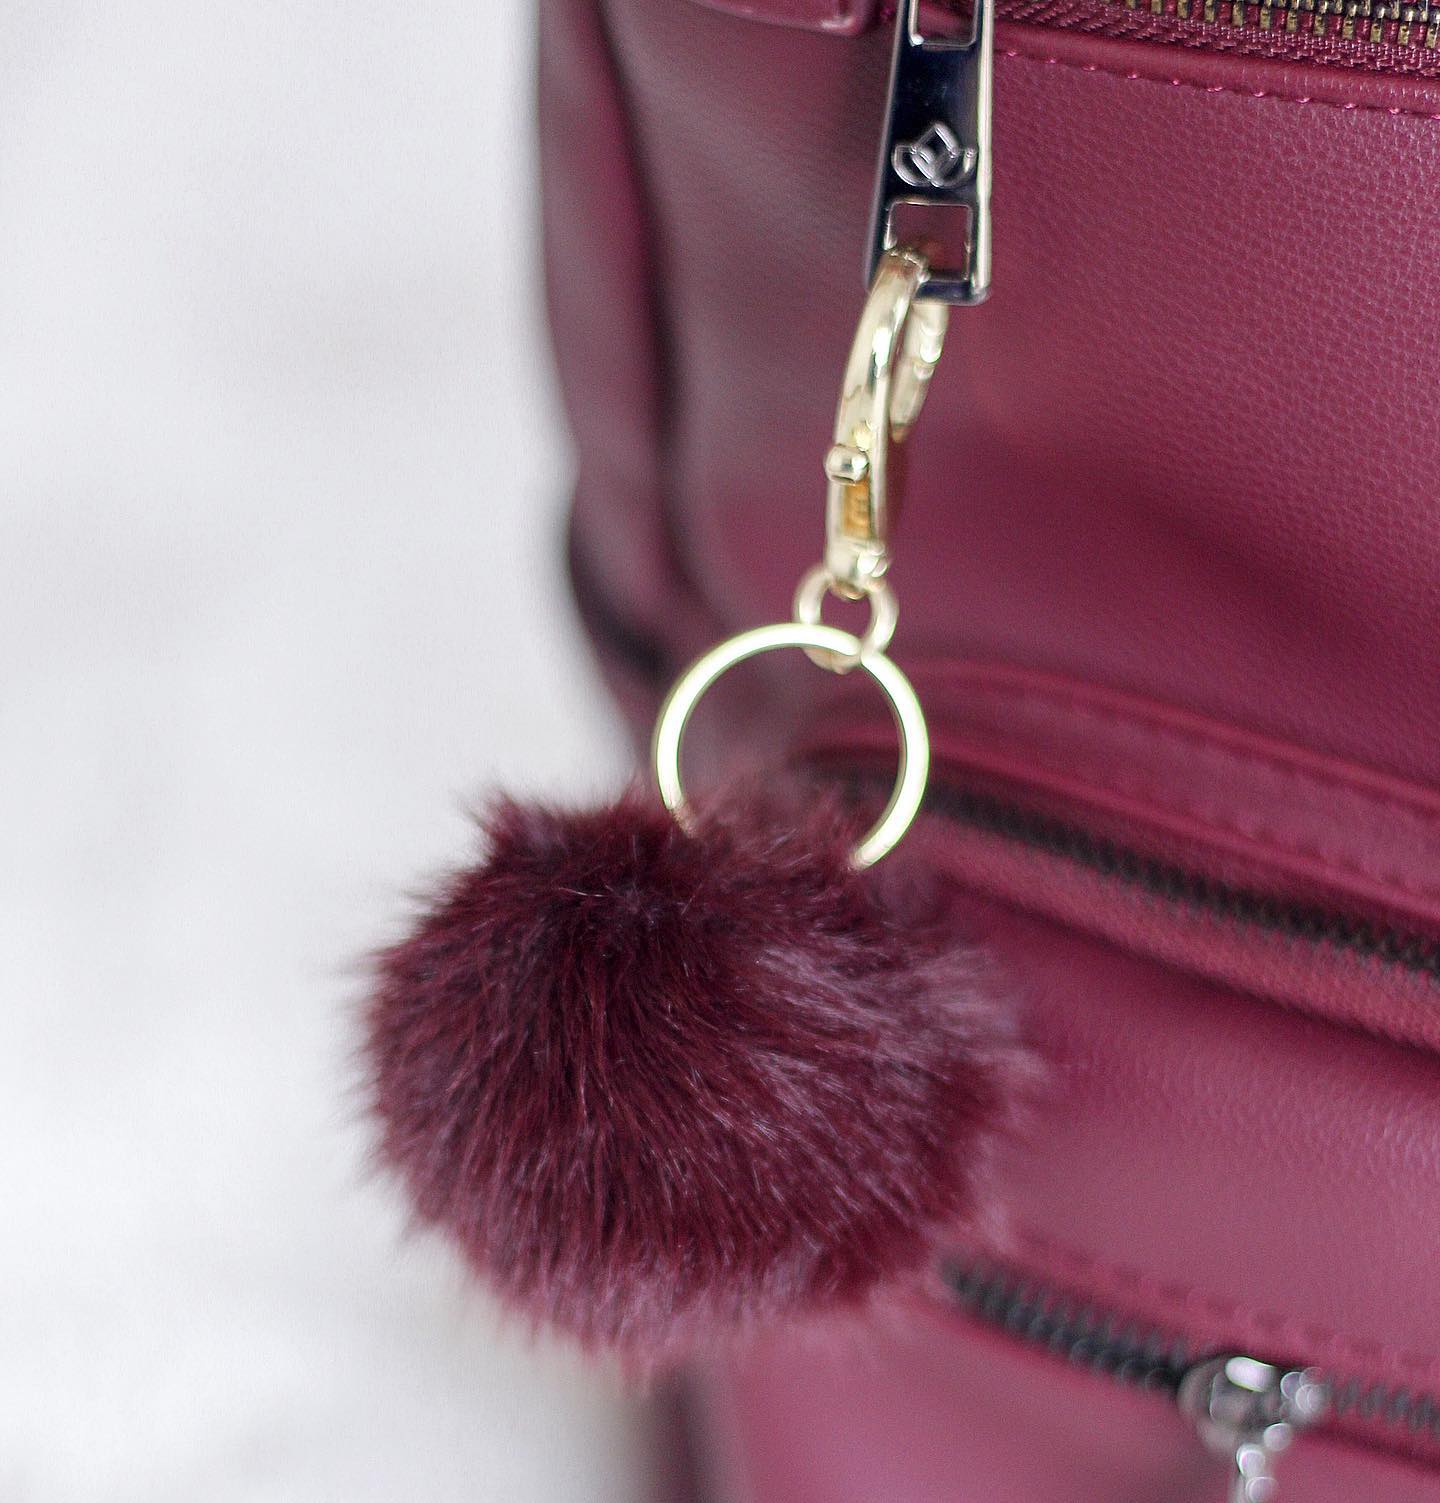 completed pom pom kit keychain attached to red purse in front of a white background.